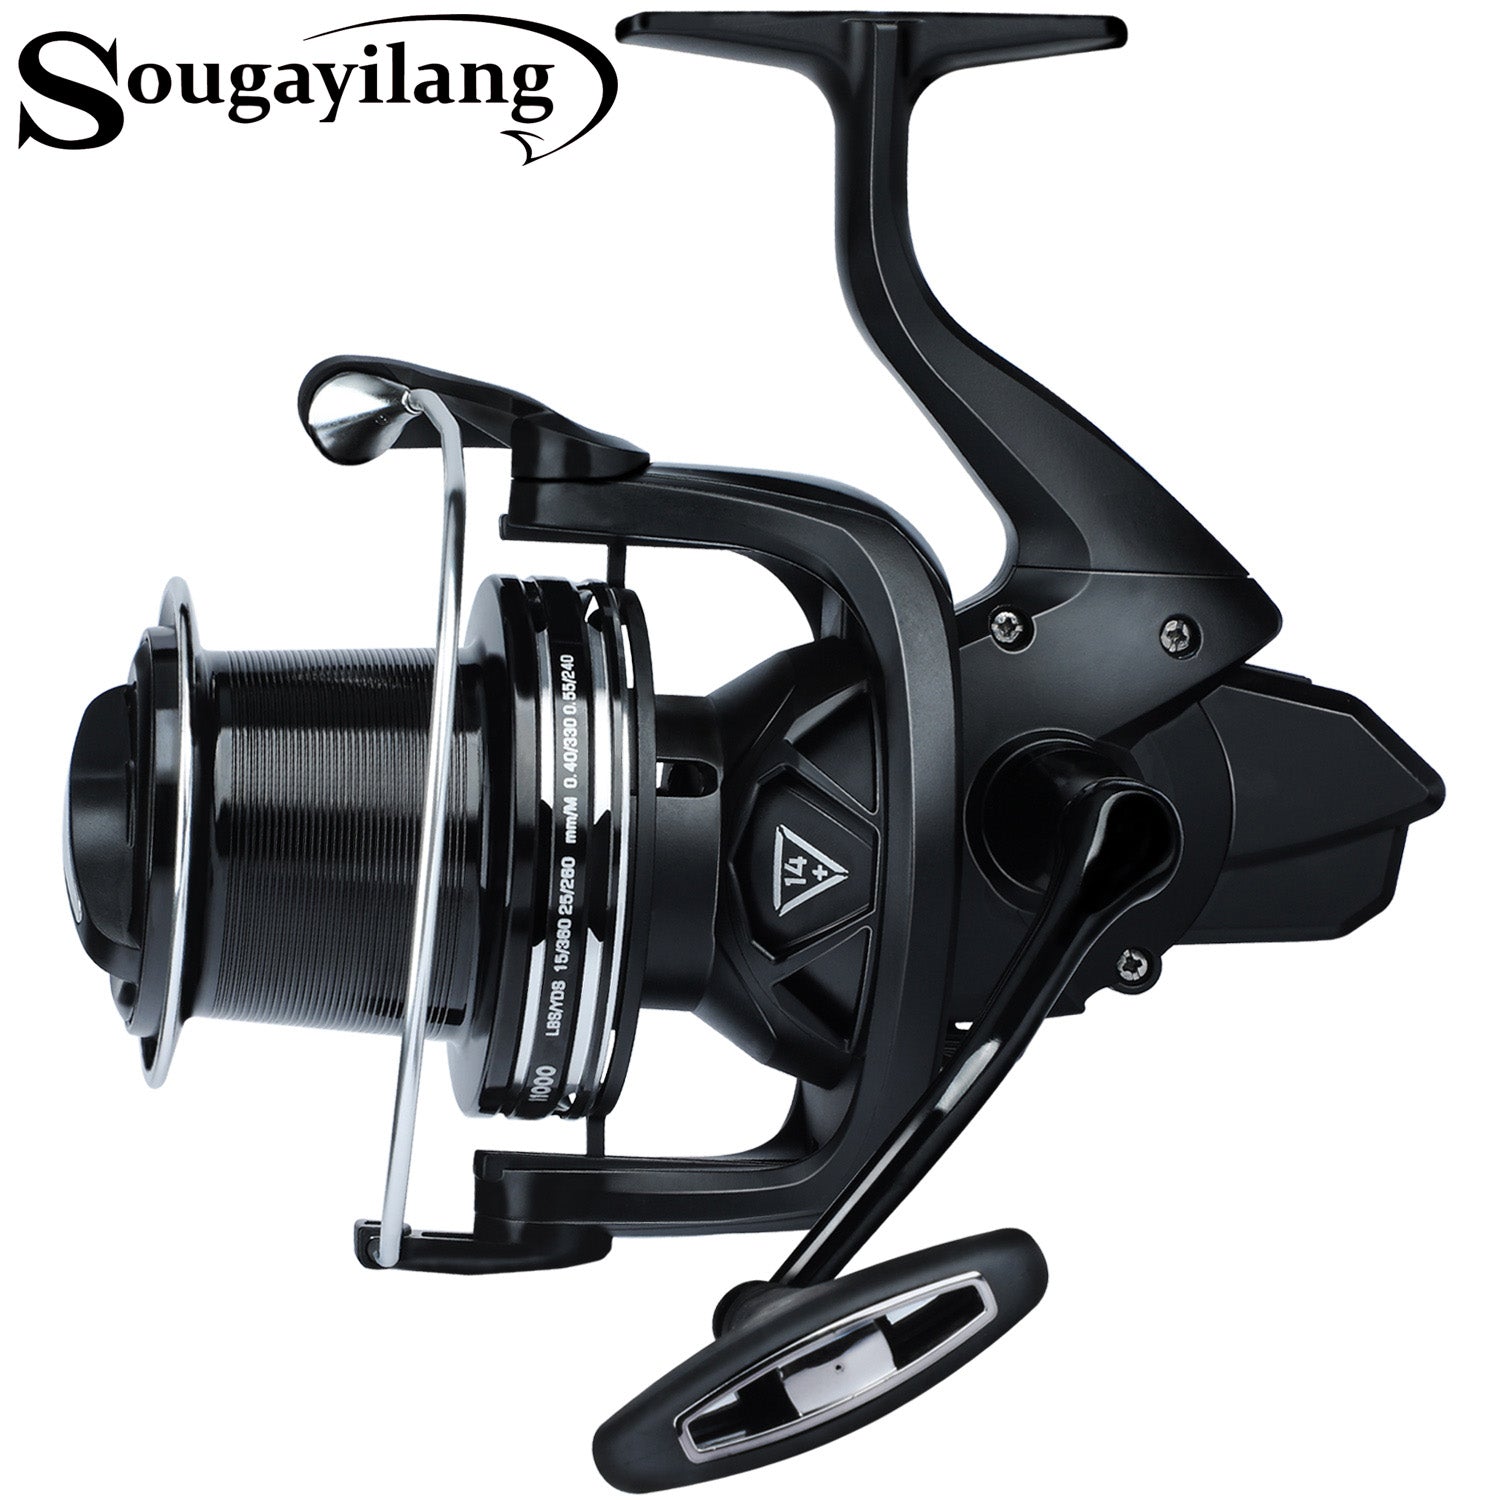 Sougayilang Spinning Fishing Reel Light Weight 6.2:1 High-Speed Gear Ratio  with 12+1 Stainless BB and CNC Aluminum Spool for Freshwater and Saltwater